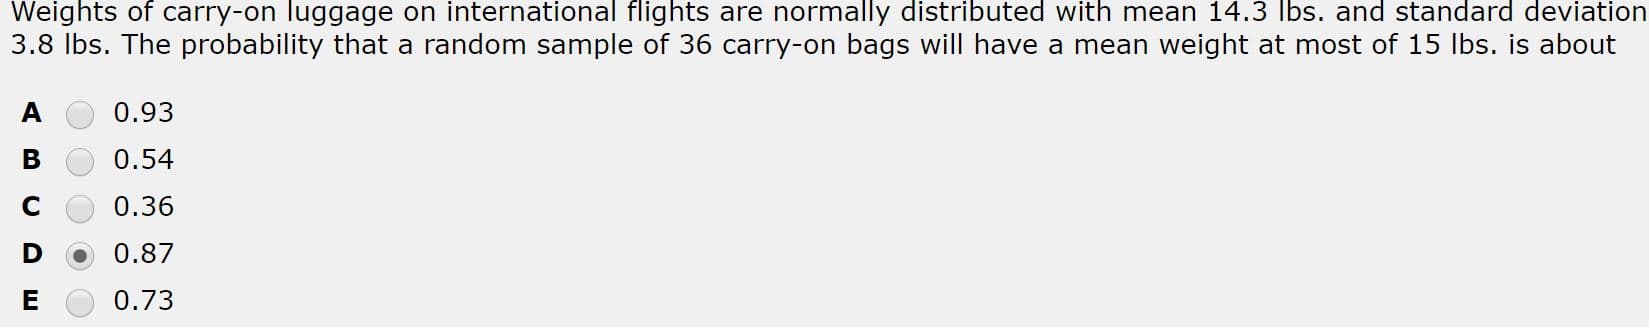 Weights of carry-on luggage on international flights are normally distributed with mean 14.3 lbs. and standard deviation
3.8 Ibs. The probability that a random sample of 36 carry-on bags will have a mean weight at most of 15 lbs. is about
0.93
0.54
0.36
0.87
0.73
ш
